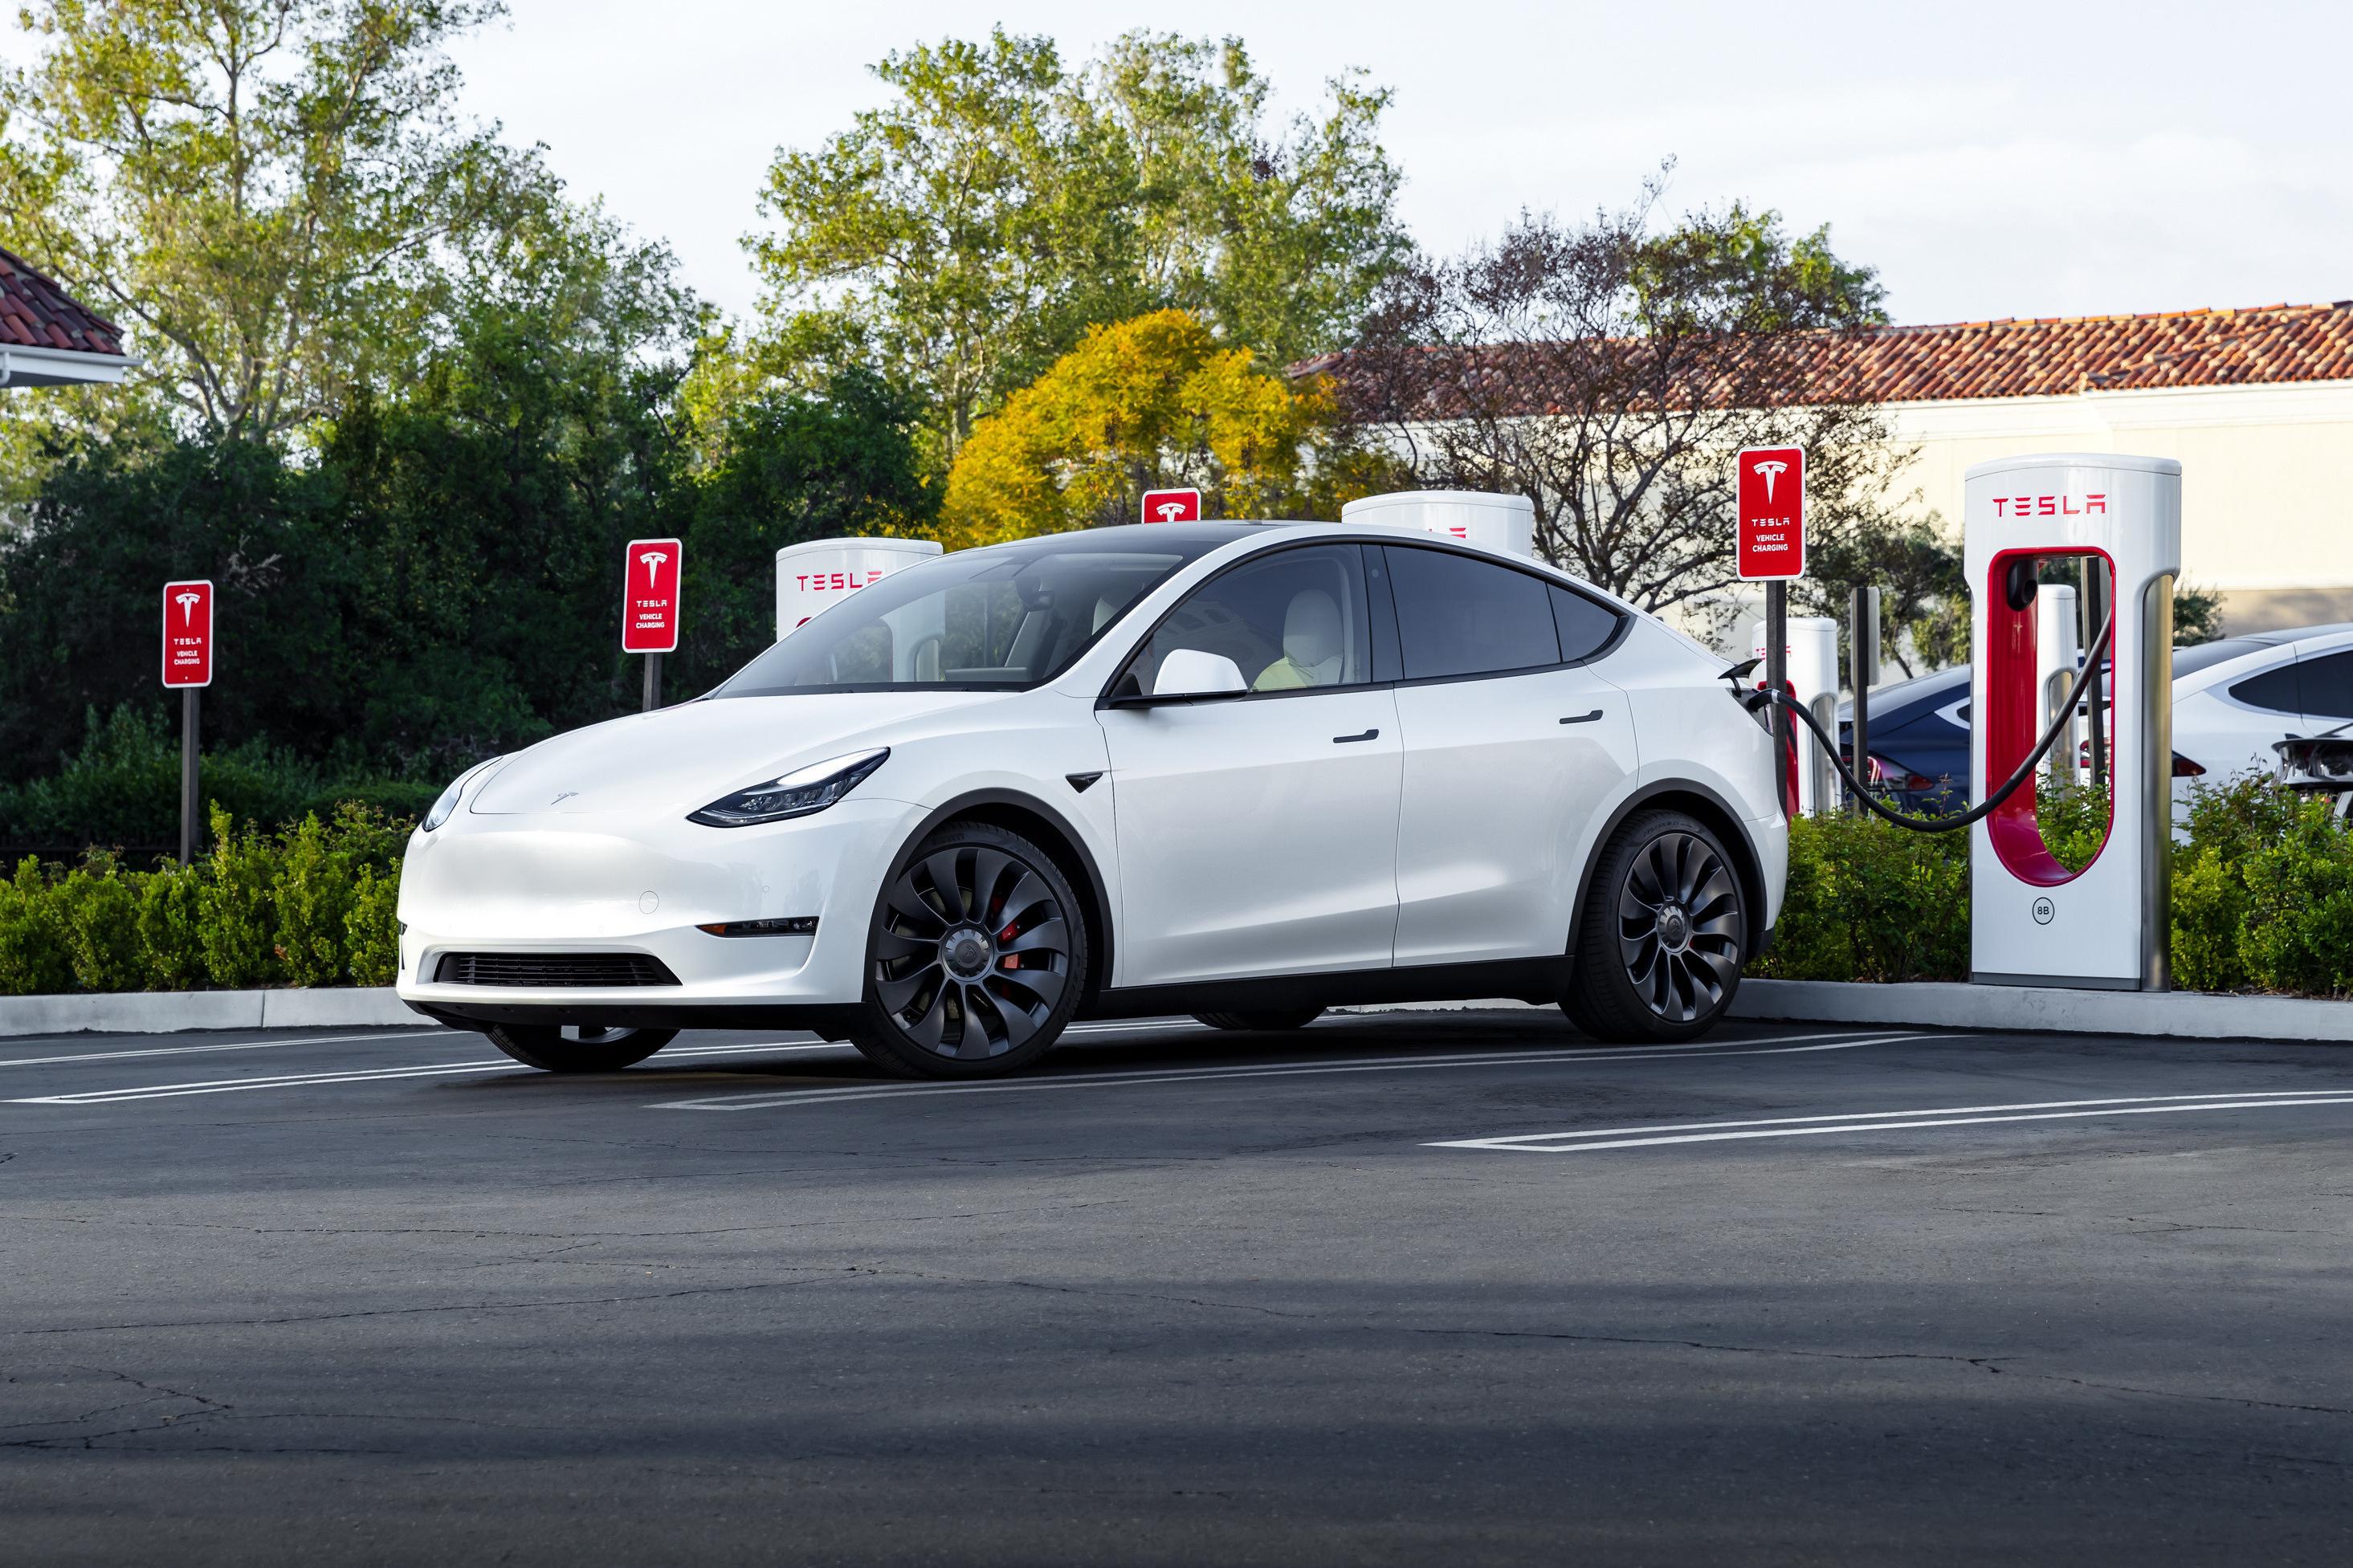 Electric cars: Supercharging tweak could fill batteries 90% in 10 mins